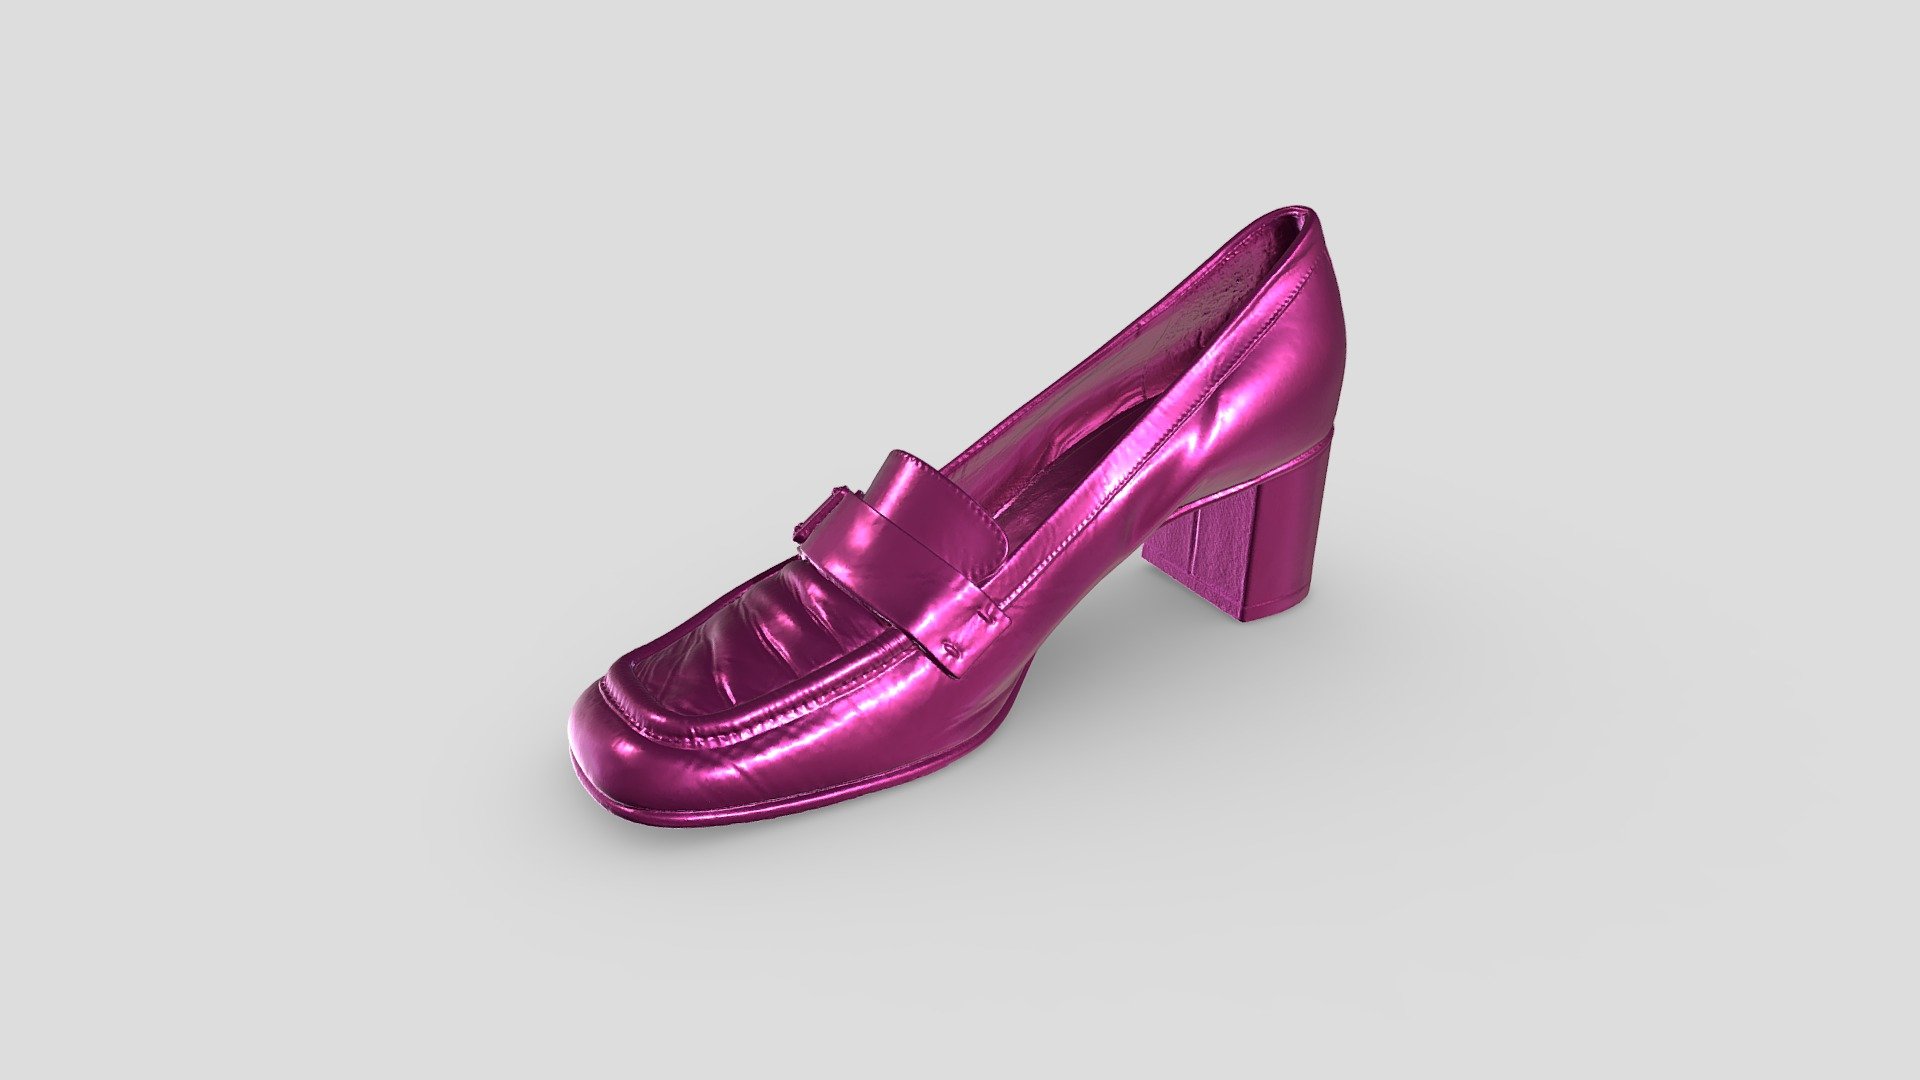 https://www.facebook.com/profile.php?id=100027655718480

high-heeled shoes scan by Thunk3D ArcherS handheld 3D scanner - high-heeled shoes - Download Free 3D model by Diana Liu (@Diana123456) 3d model